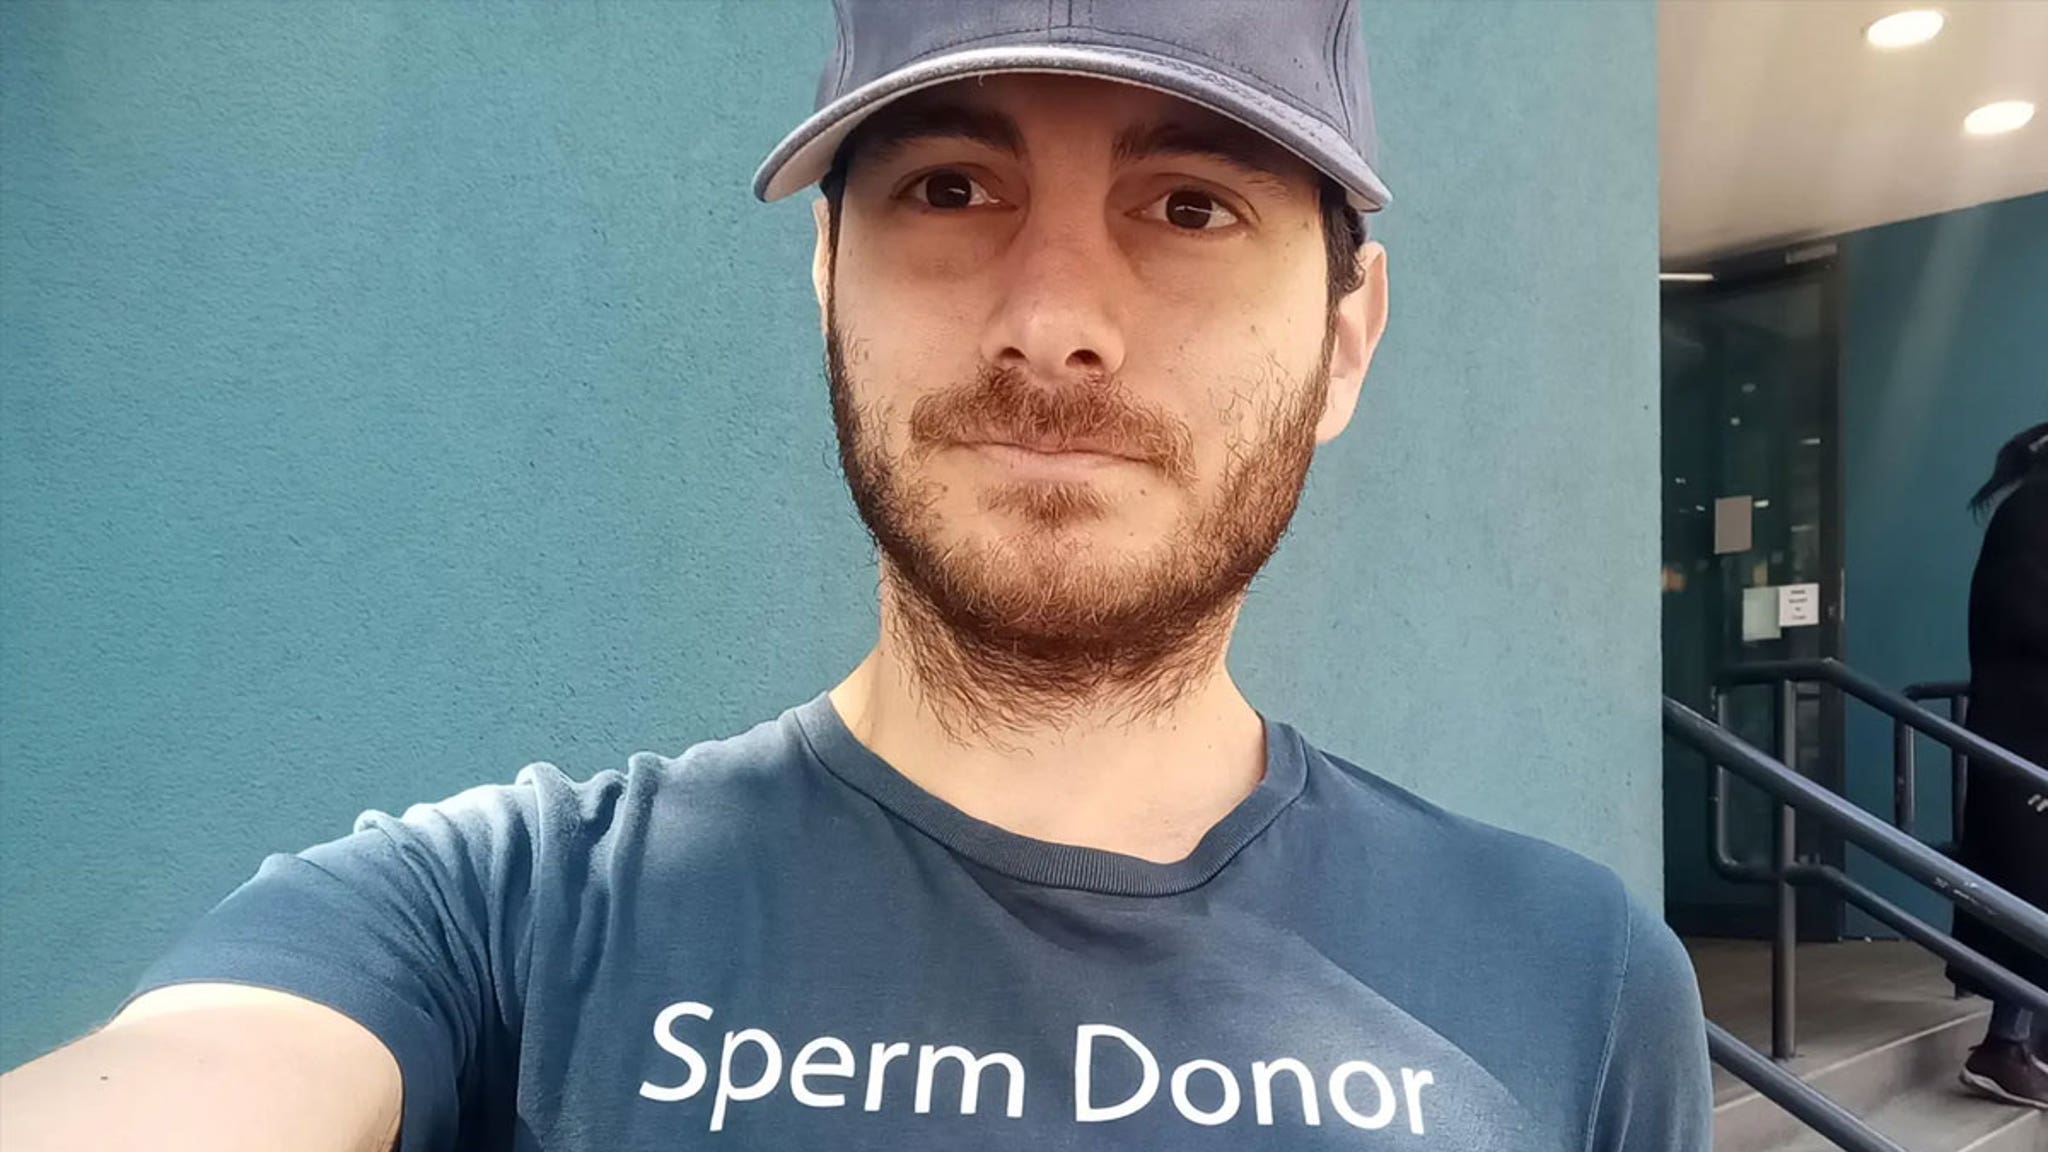 Sperm Donor with 47 Kids Says Women Won't Date Him thumbnail